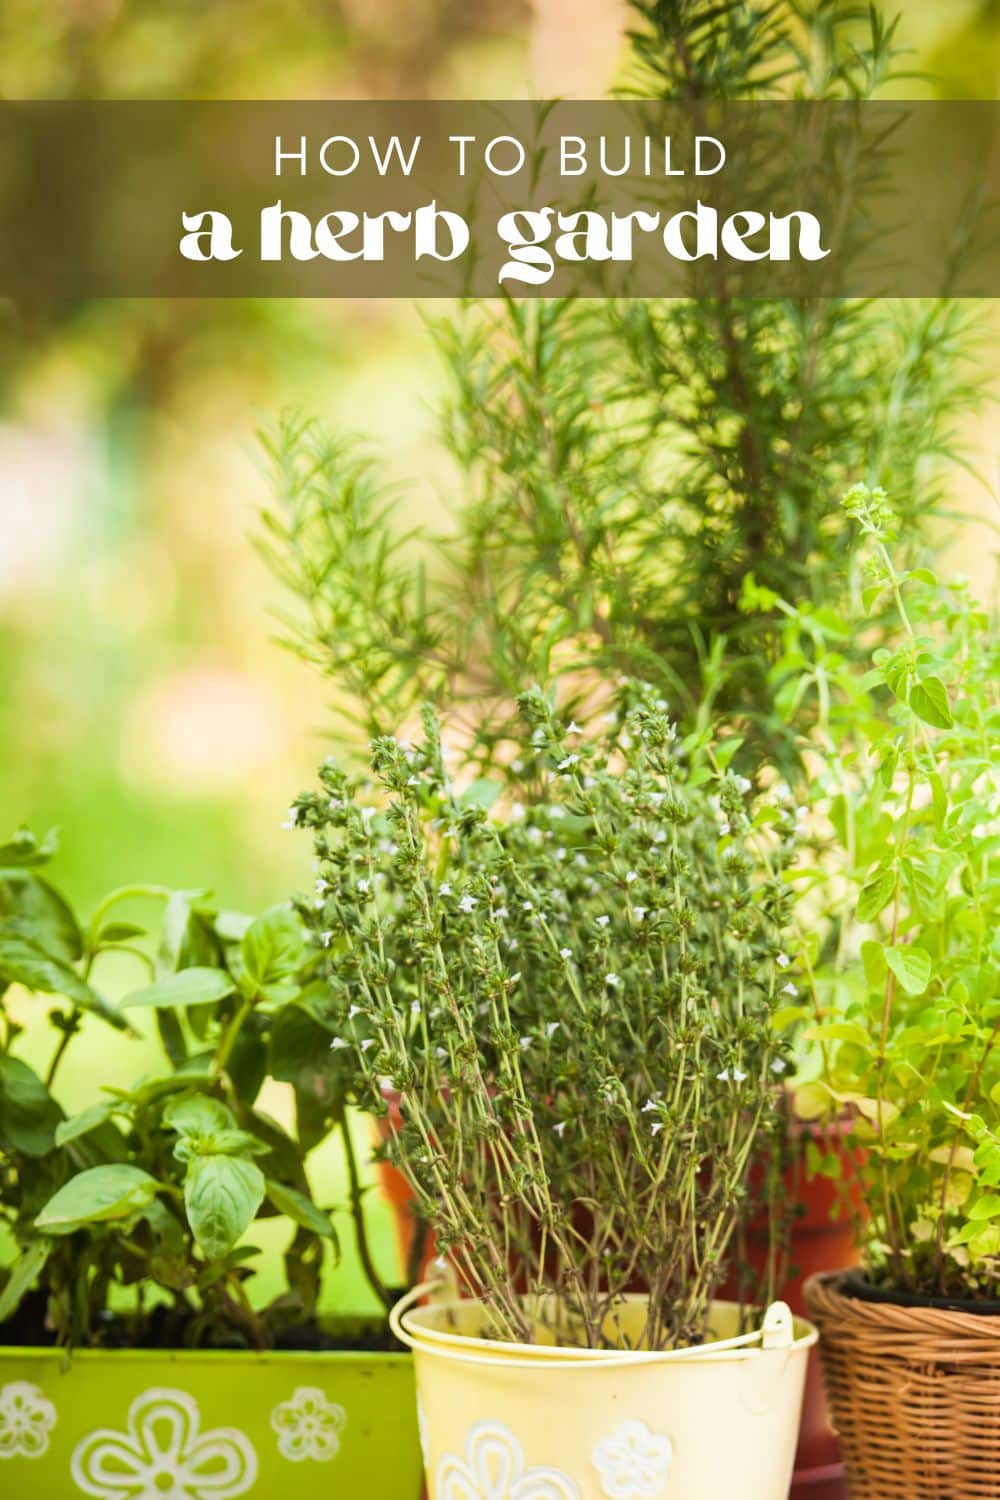 From the kitchen to your outdoor space, herbs are a great way to bring life into your home. These useful little plants can be used in various ways, from adding flavor to your cooking to providing natural healing ingredients and creating a peaceful environment. With the right amount of planning and care, you can create a beautiful and useful herb garden!